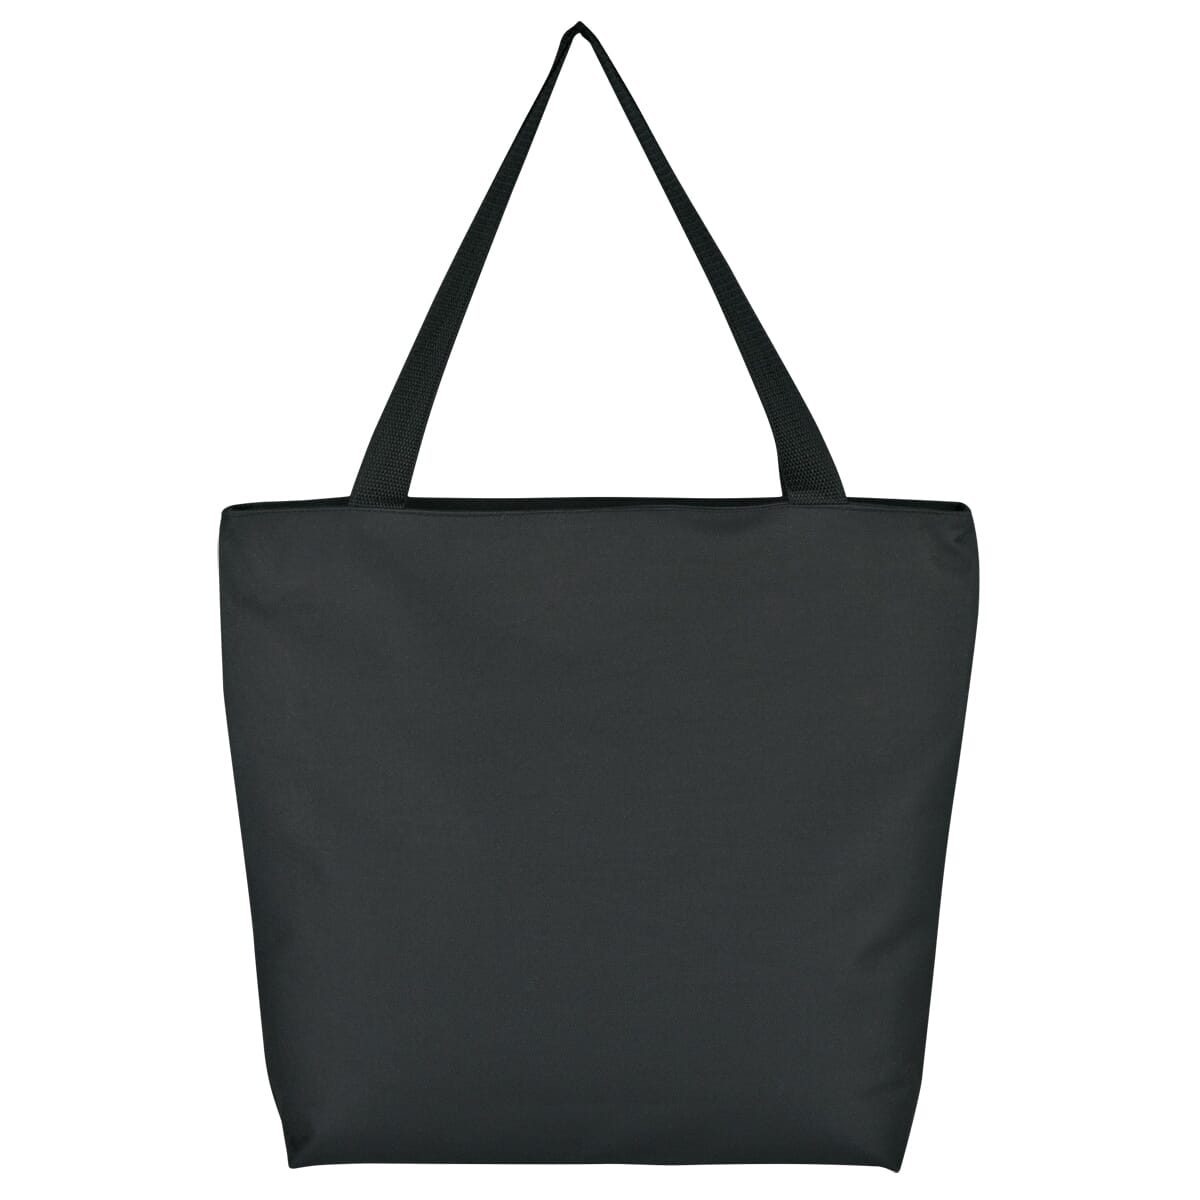 Expert Two-Tone Tote Bag - Promotional Giveaway | Crestline